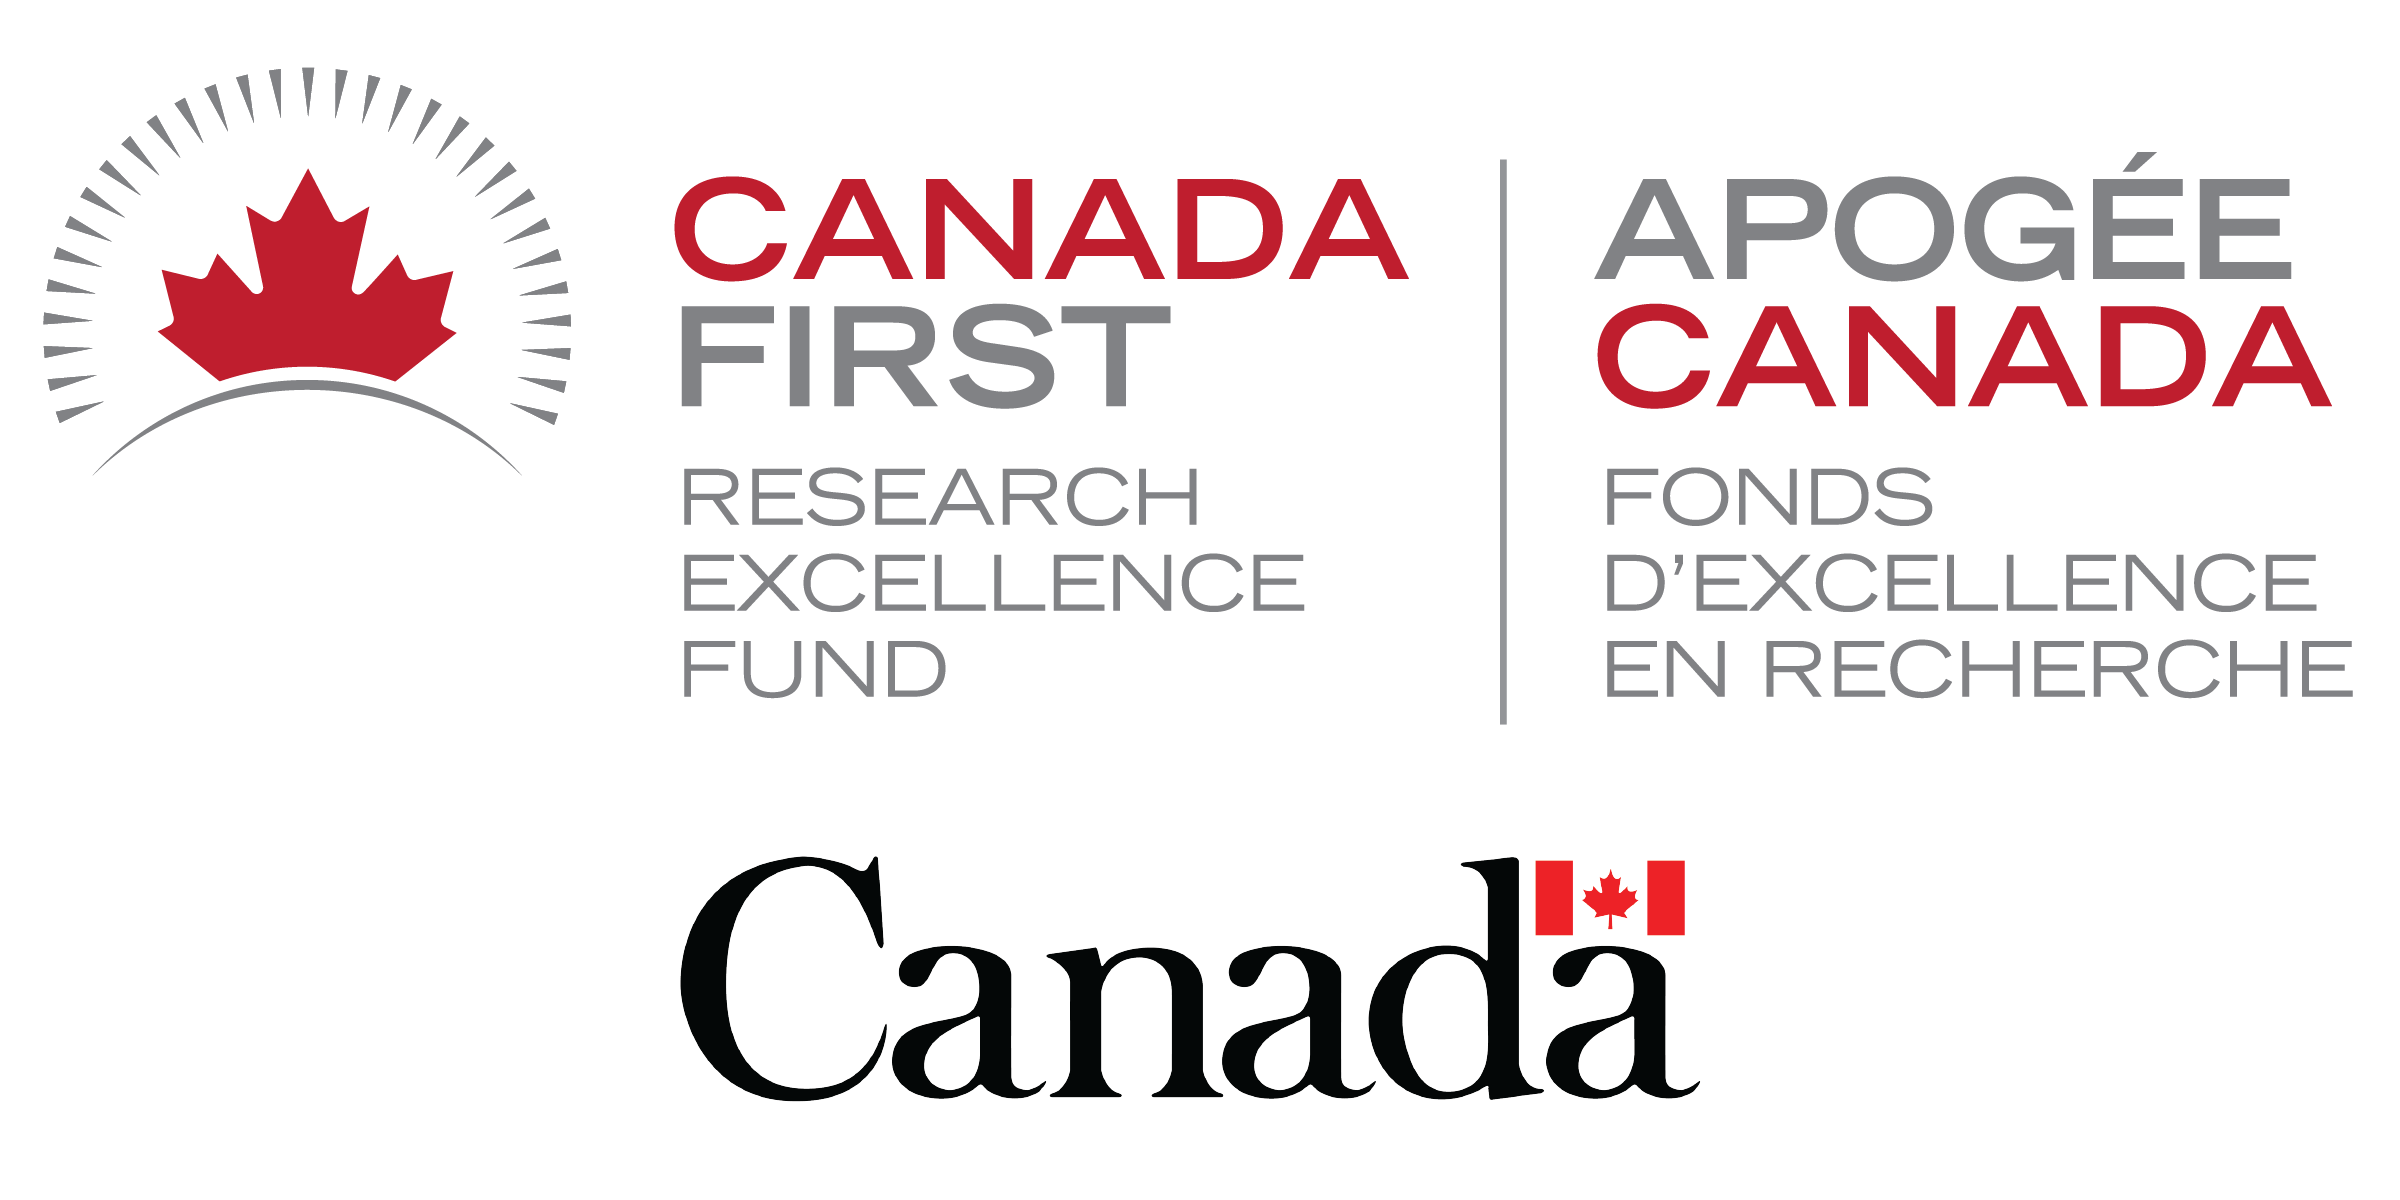 Canada First Research Excellence Fund logo.